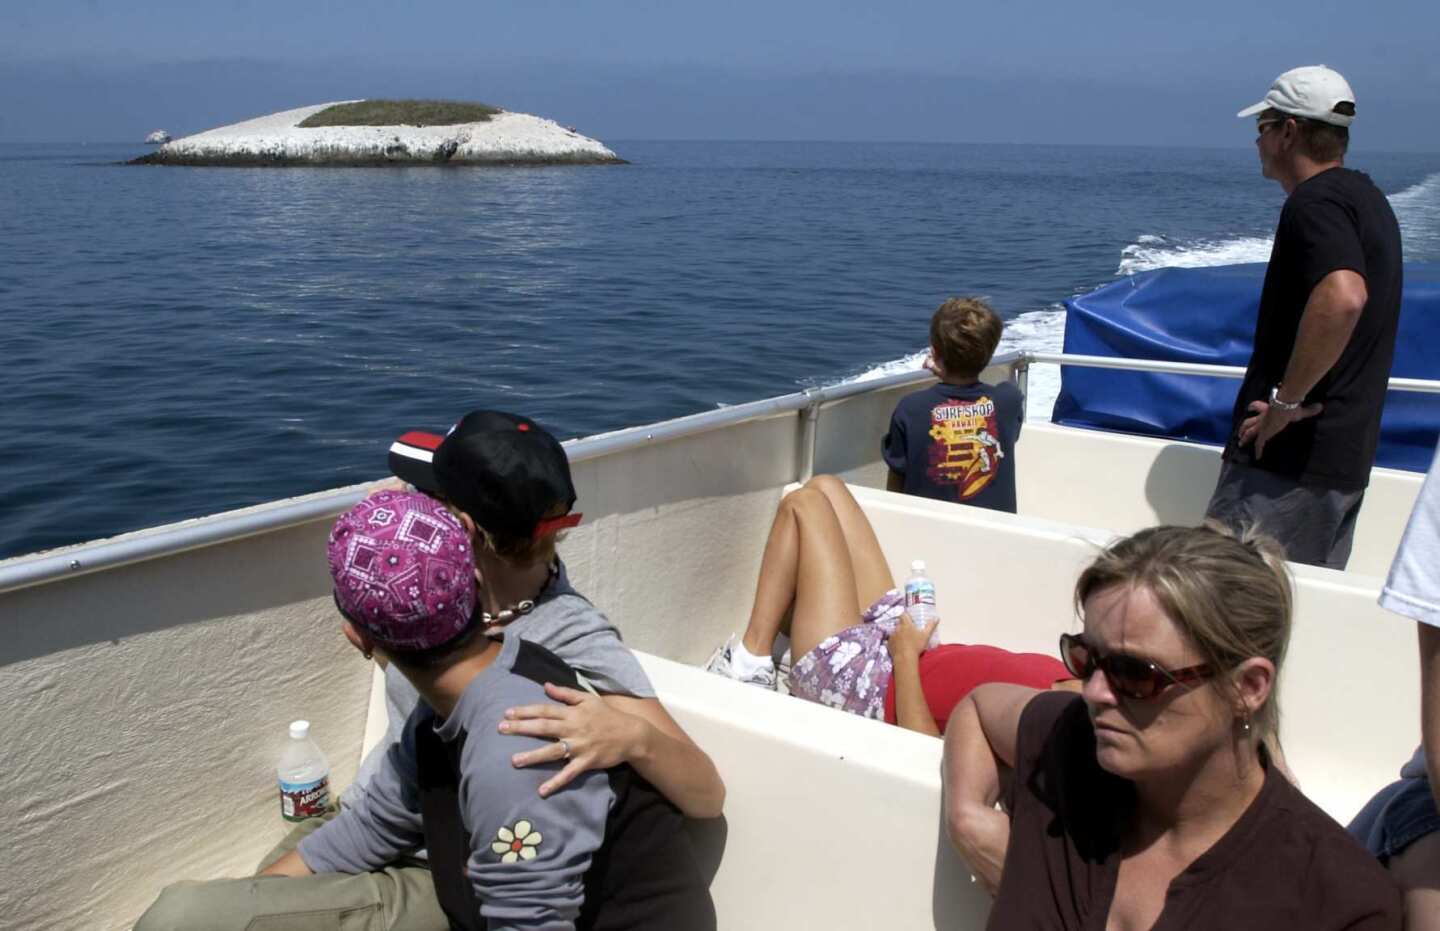 The 1.3-acre isle off Santa Catalina Island, listed at $657,000, has been used as a shooting location.